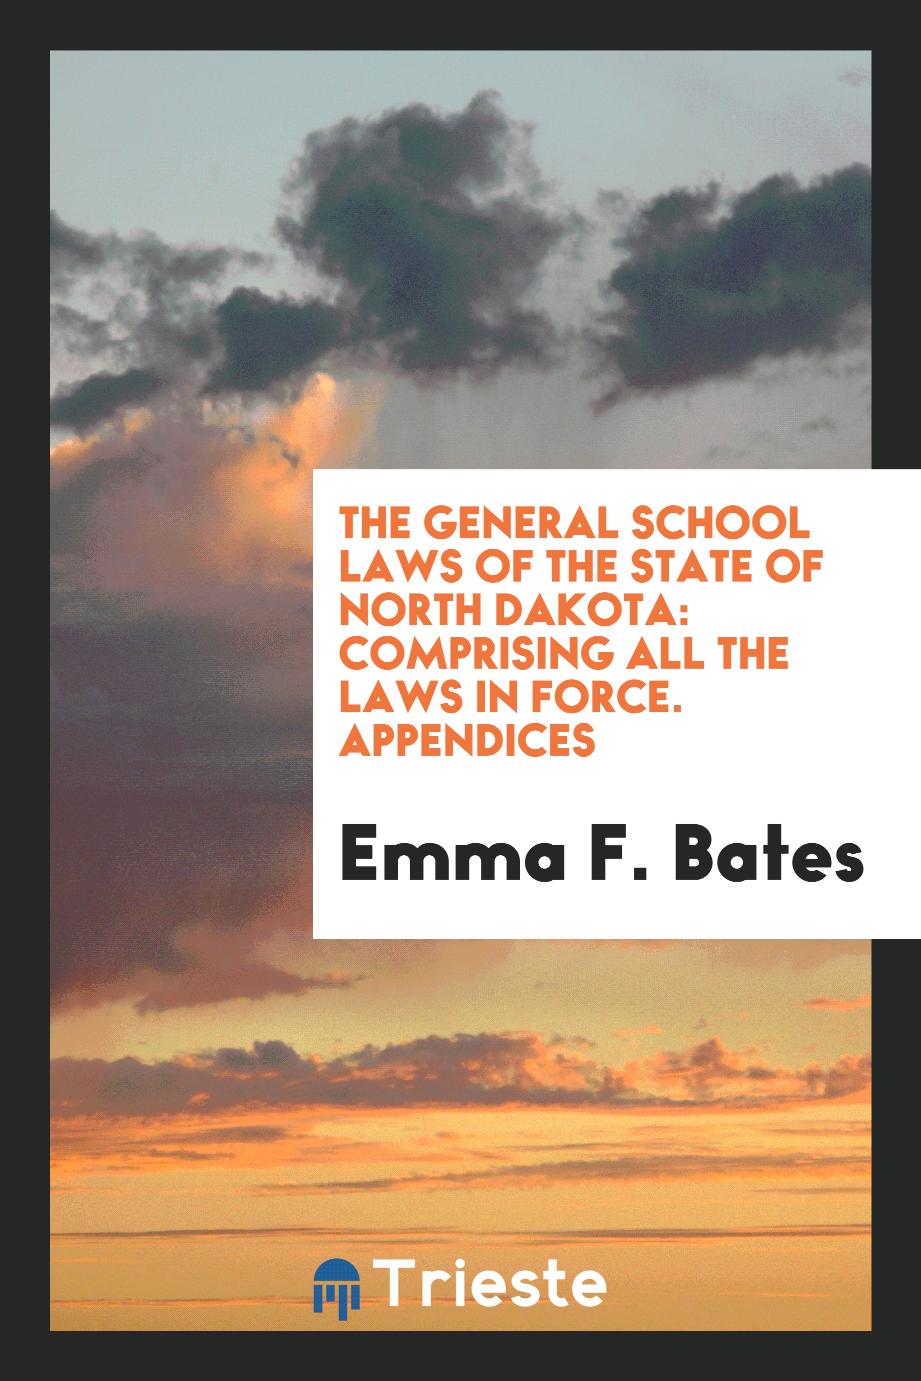 The General School Laws of the State of North Dakota: Comprising All the Laws in Force. Appendices